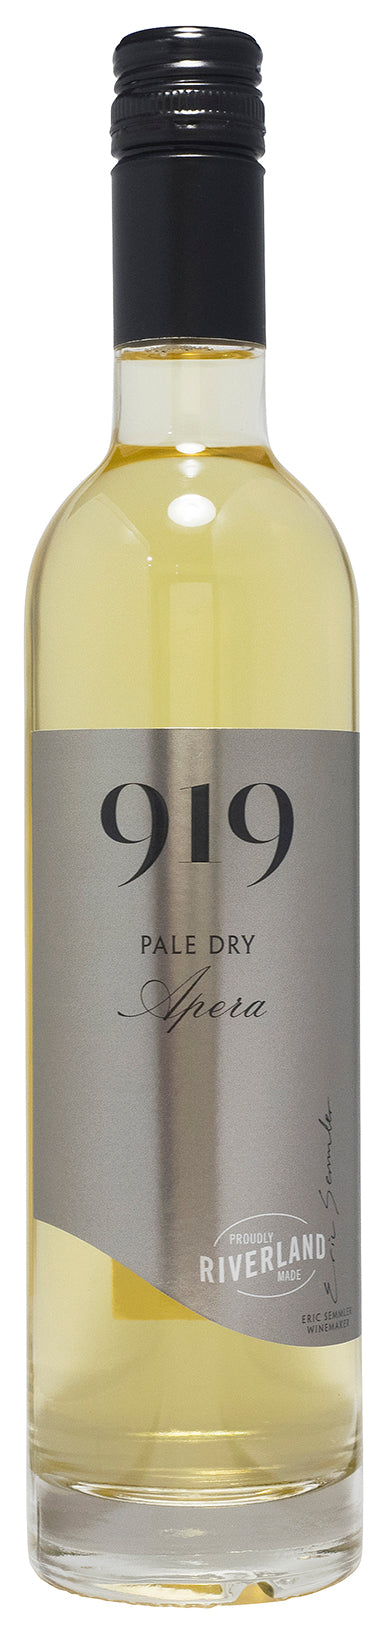 919 Reserve Collection Pale Dry Apera 500mL